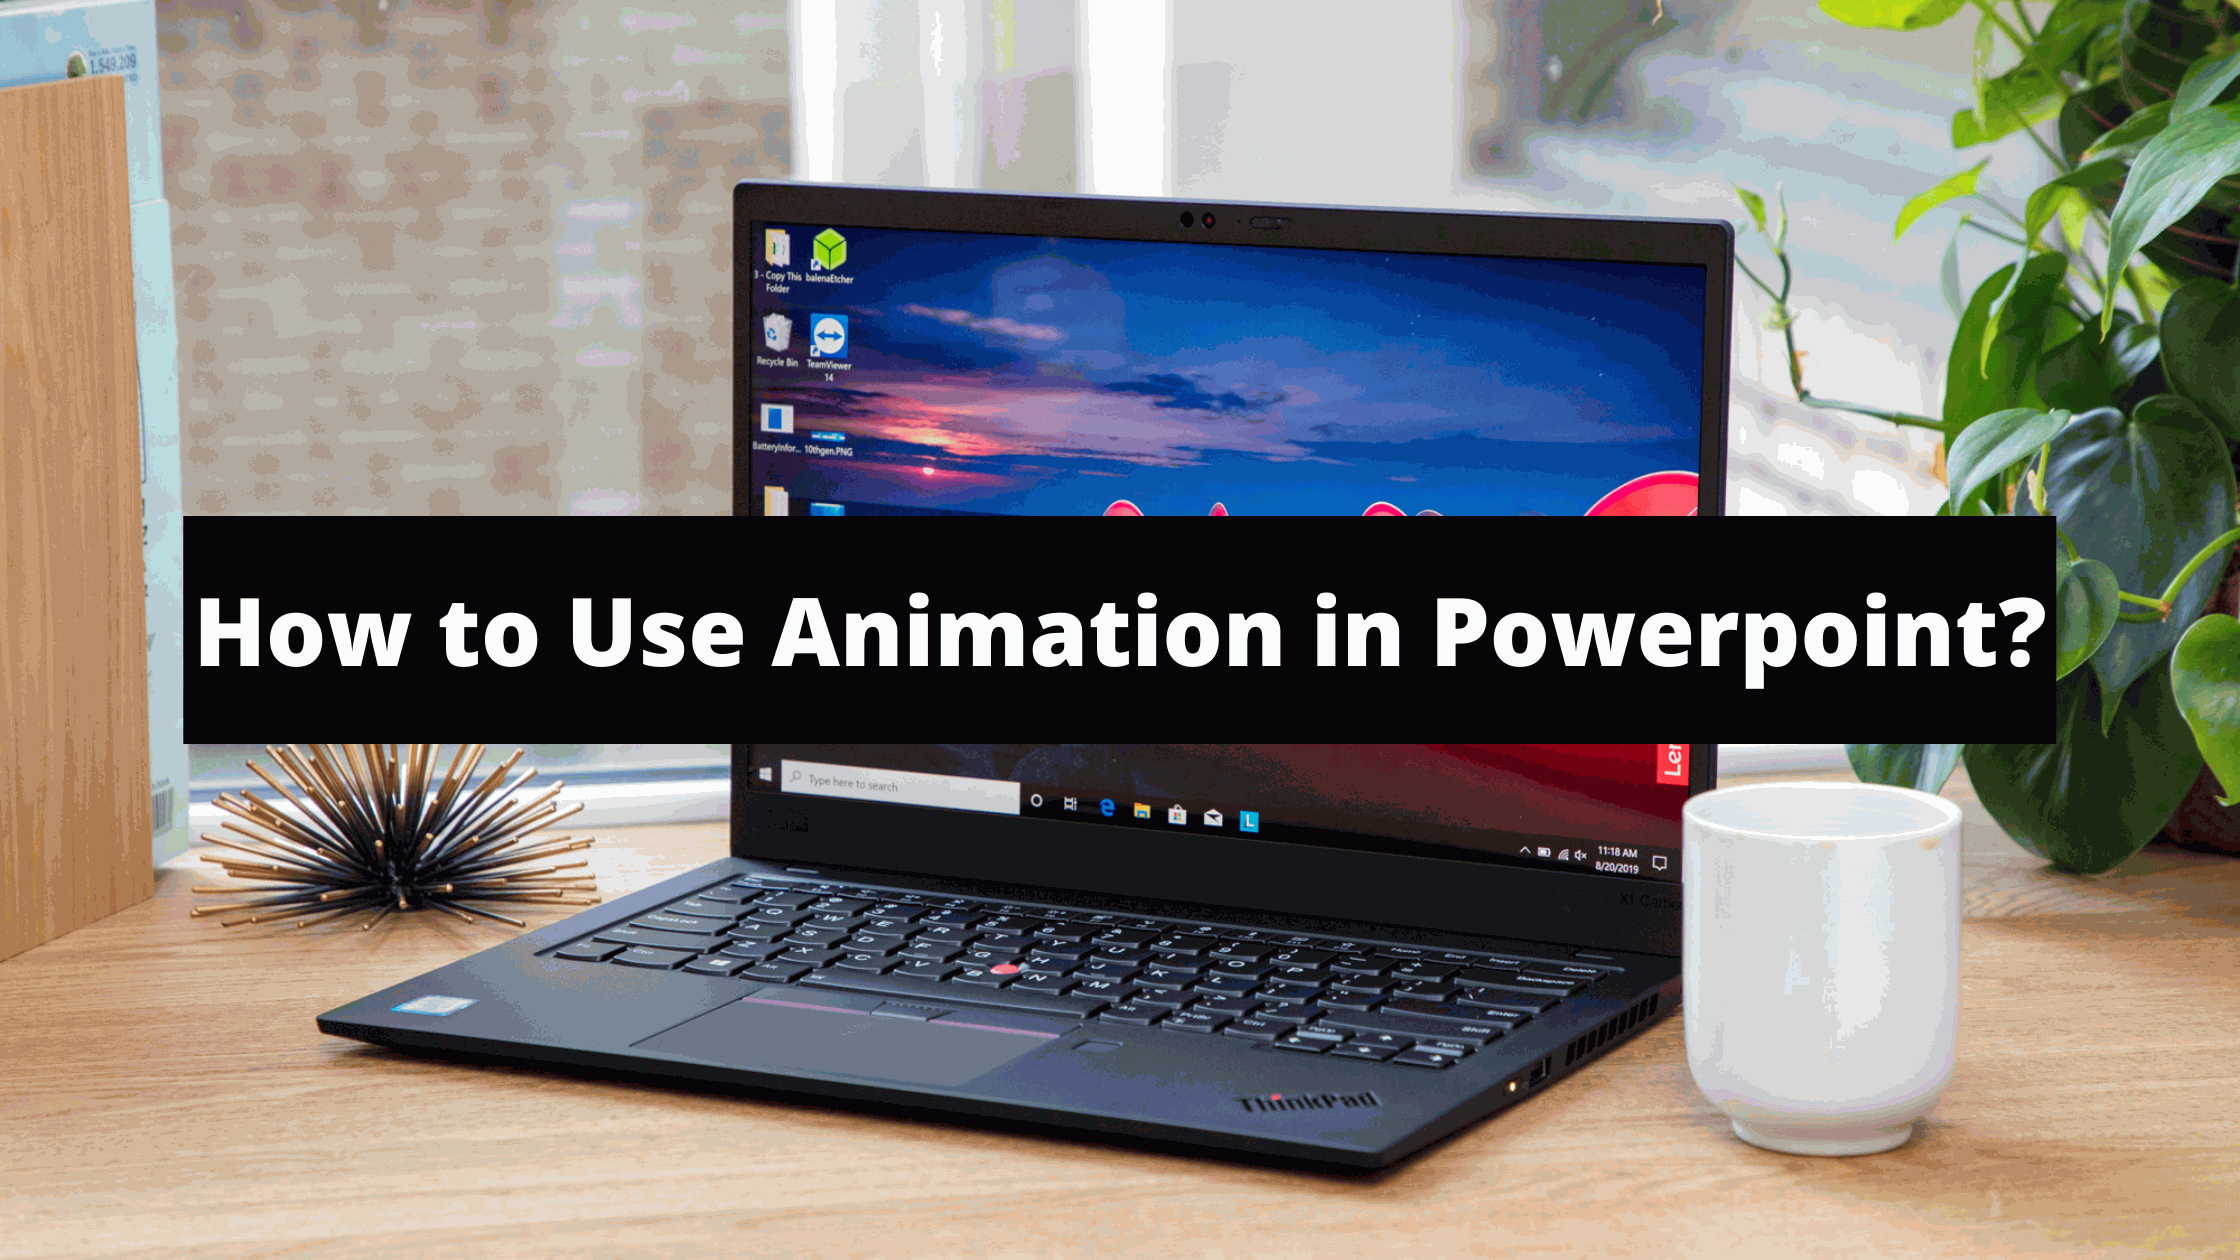 How to Use Animation in Powerpoint?